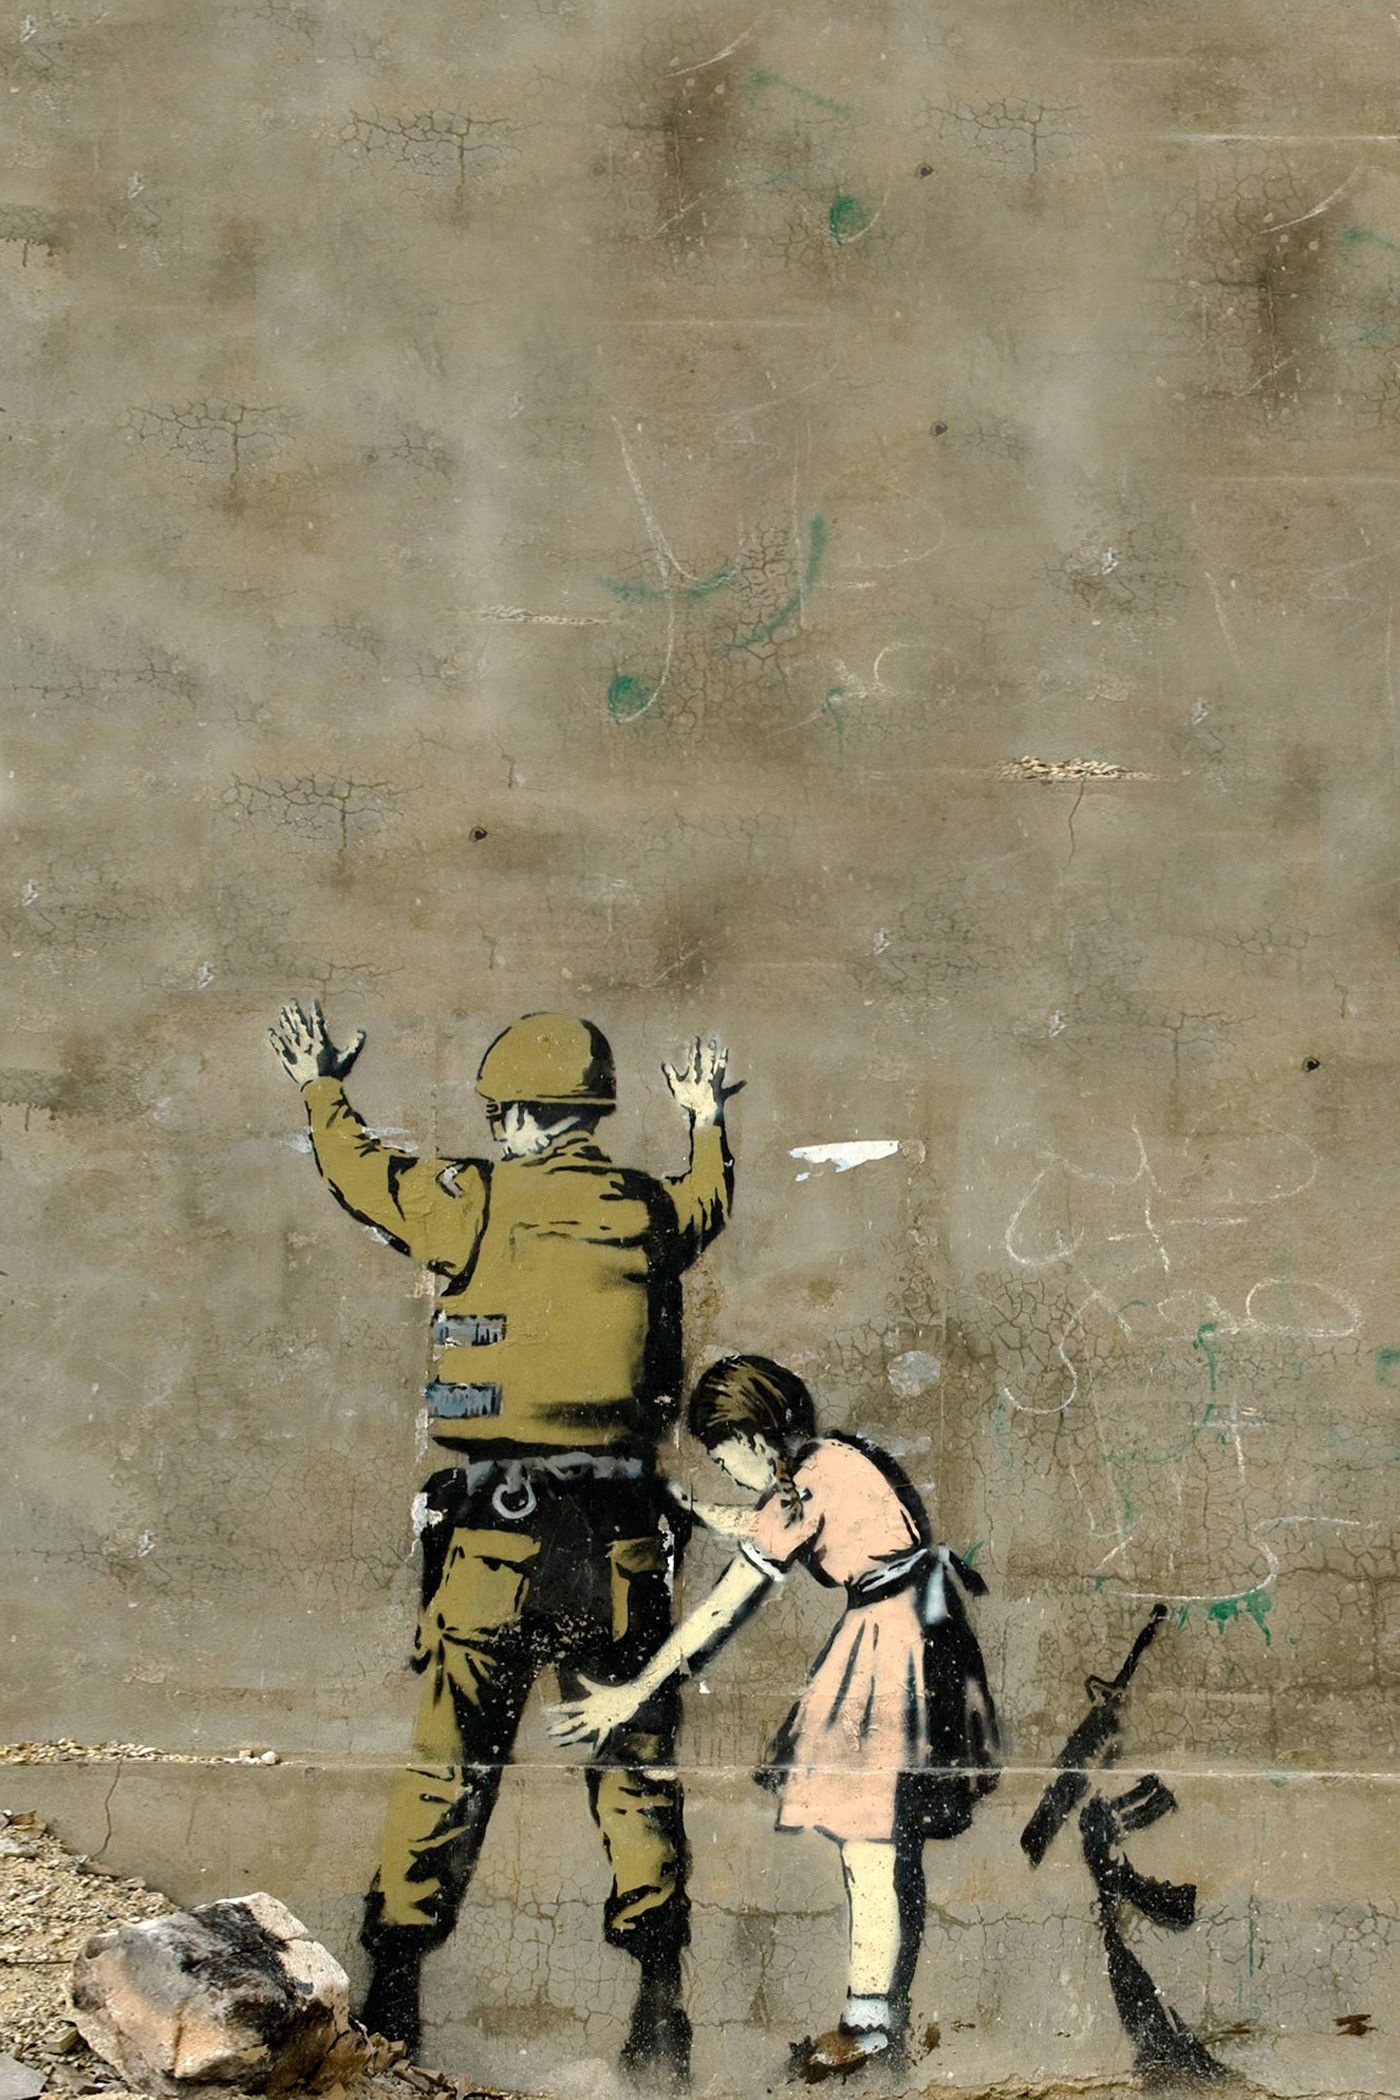 Banksy: Girl Frisking Soldier, located on the West Wall of Bethlehem. 1400x2100 HD Wallpaper.